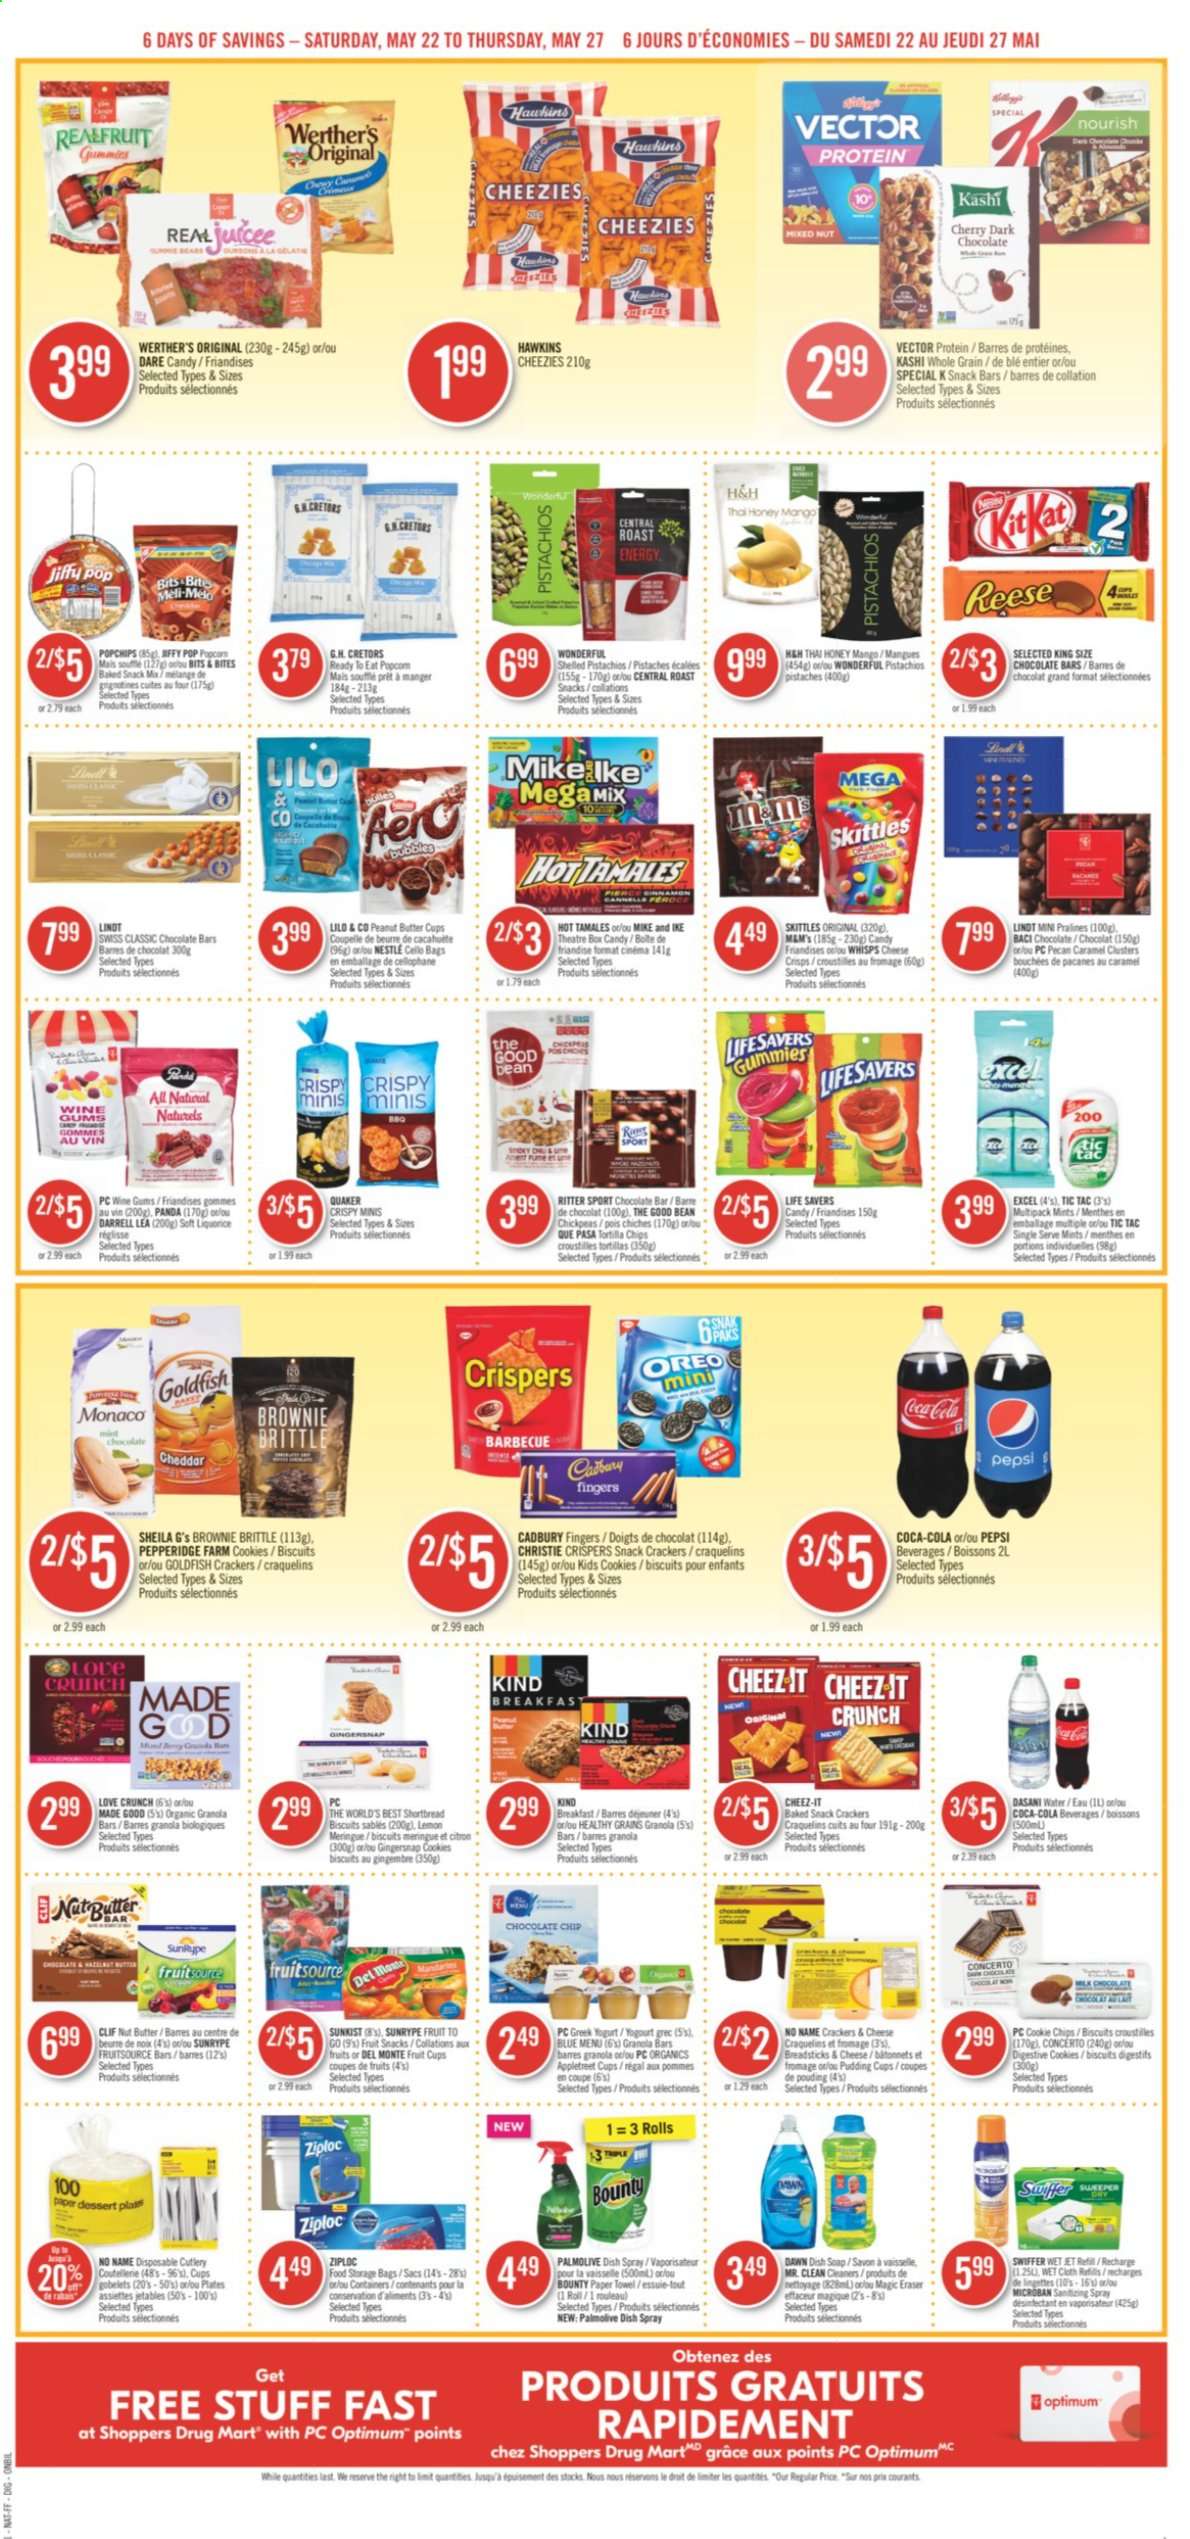 thumbnail - Shoppers Drug Mart Flyer - May 22, 2021 - May 27, 2021 - Sales products - cookies, Bounty, brownies, crackers, biscuit, dark chocolate, Cadbury, Digestive, Skittles, Tic Tac, Ritter Sport, peanut butter cups, fruit snack, snack bar, chocolate bar, bread sticks, tortilla chips, Goldfish, Cheez-It, pudding, granola bar, Quaker, chickpeas, honey, nut butter, pistachios, Coca-Cola, Pepsi, paper towels, Swiffer, Jet, Palmolive, soap, Ziploc, Nestlé, Oreo, chips. Page 4.